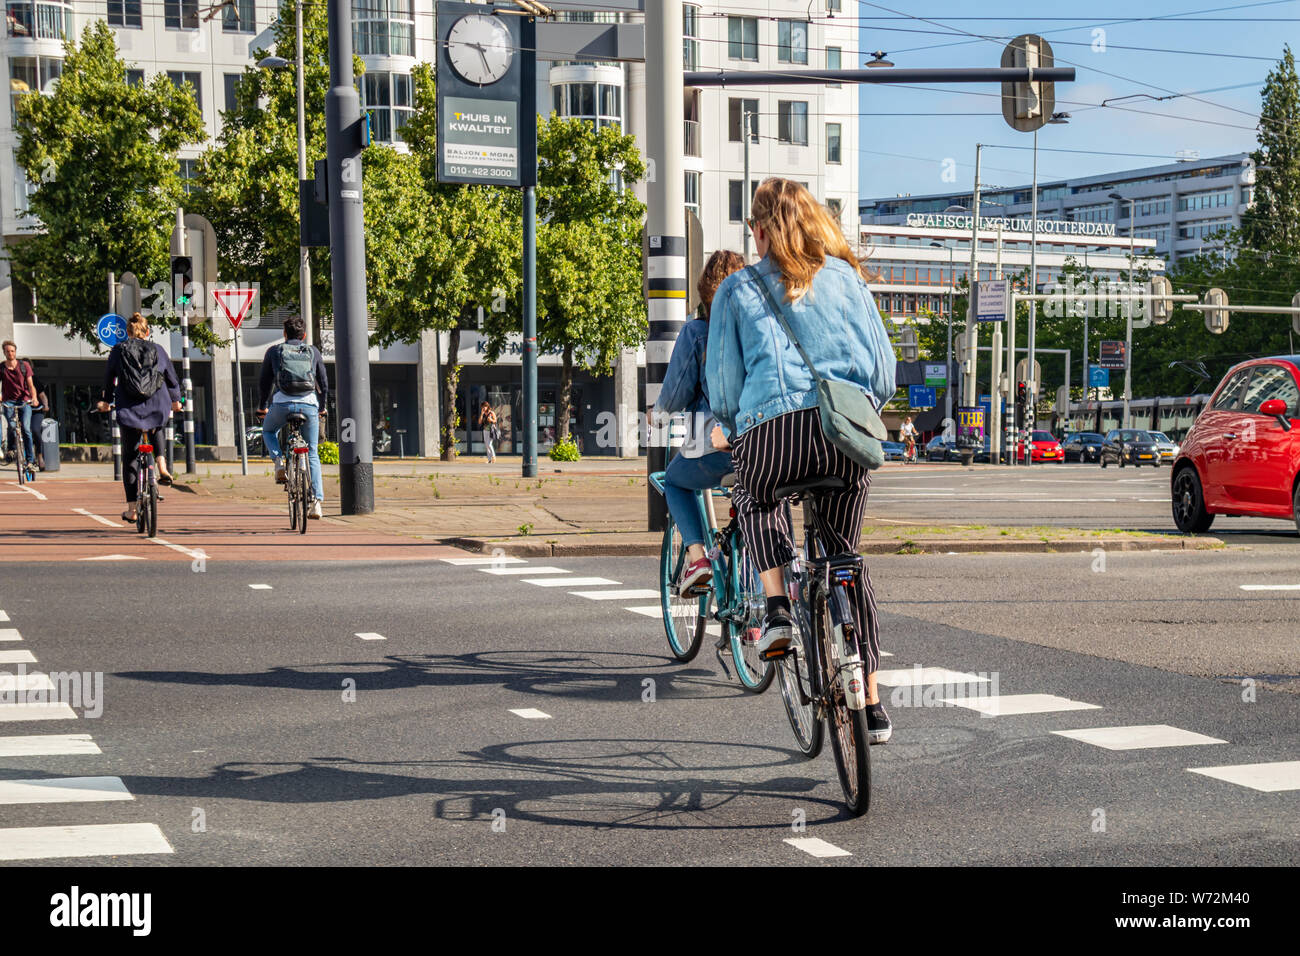 Rotterdam, Netherlands. June 27, 2019. People riding bikes in the city center, Spring sunny day Stock Photo